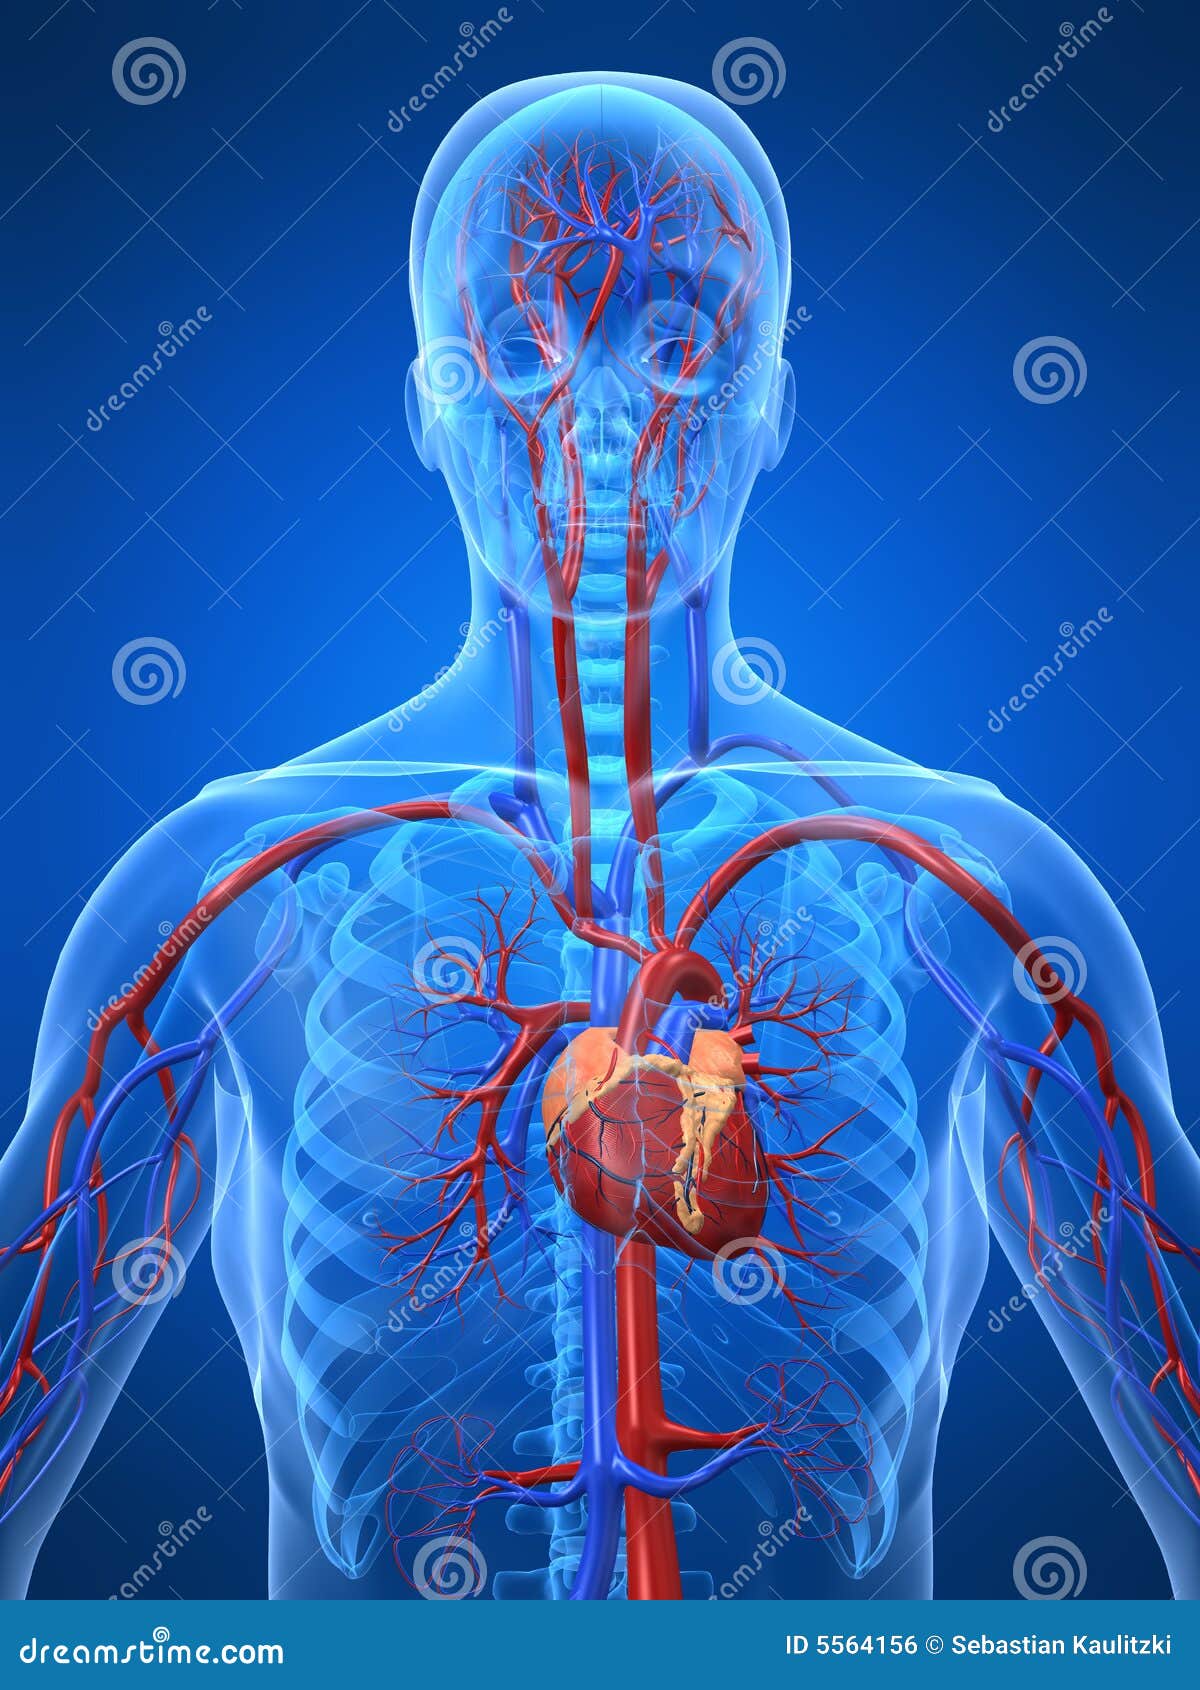 Cardiovascular System Royalty Free Stock Image - Image: 5564156